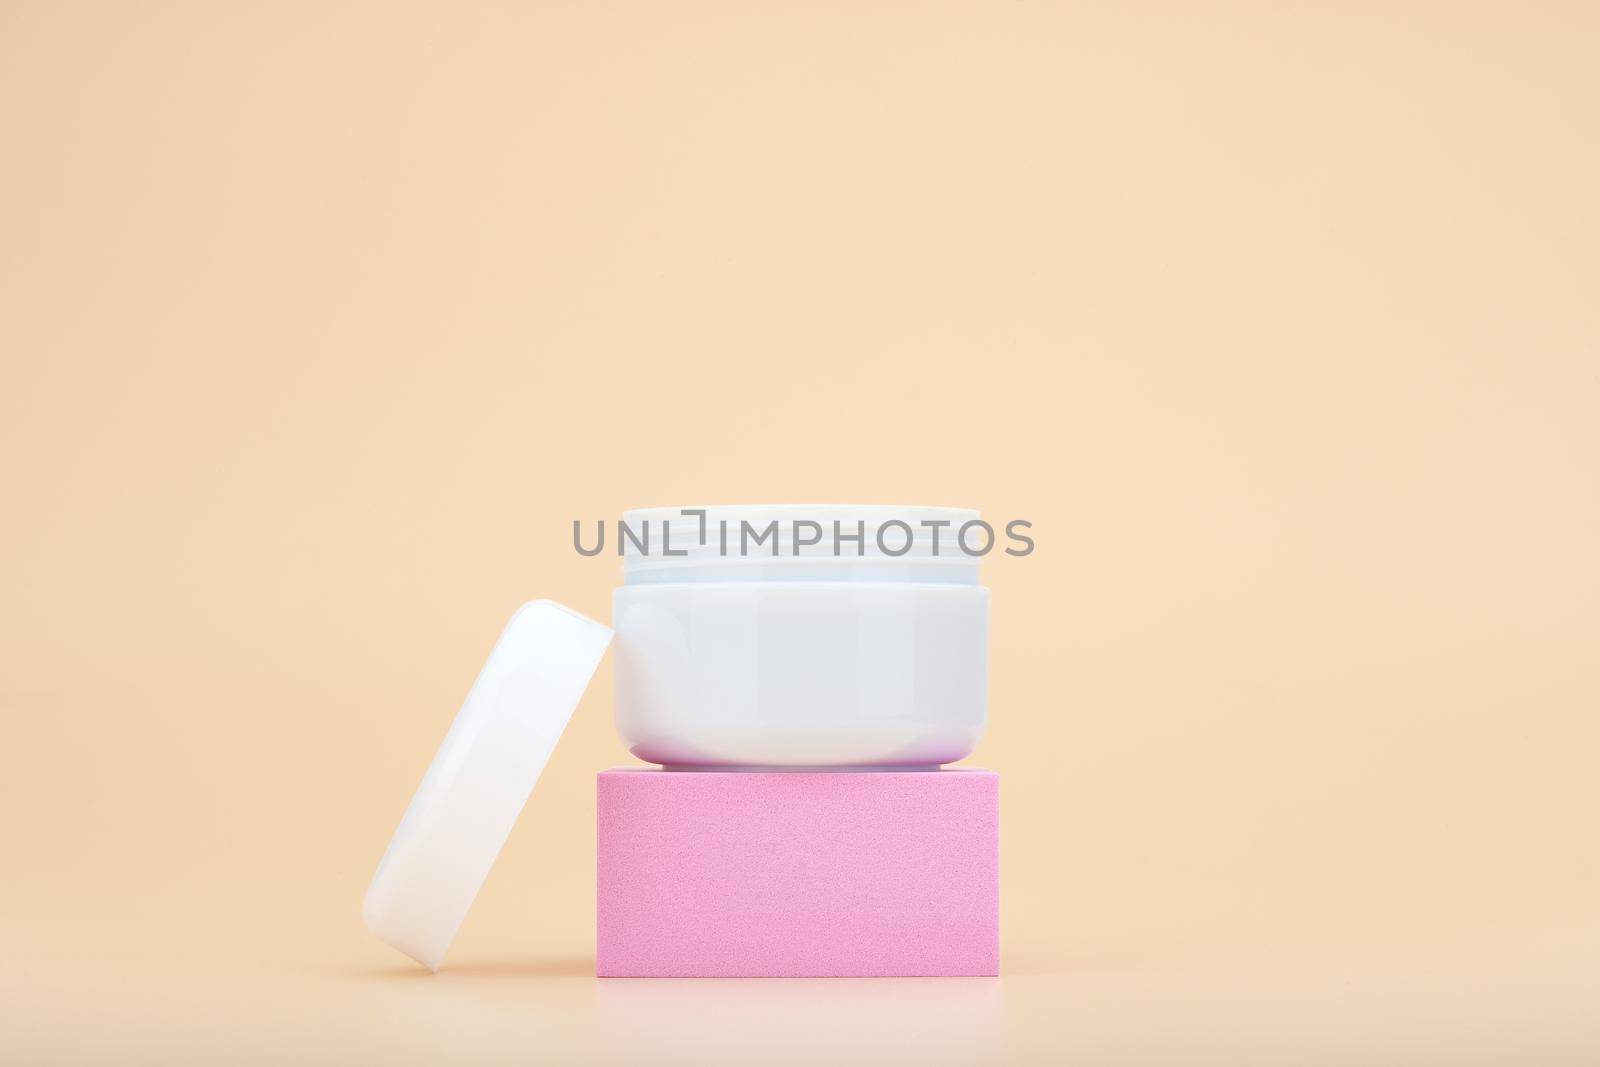 White opened cosmetic jar on pink podium against beige background with copy space. Concept of beauty products for skin care, body care or hair care. Face cream, scrub or mask enriched with natural oil